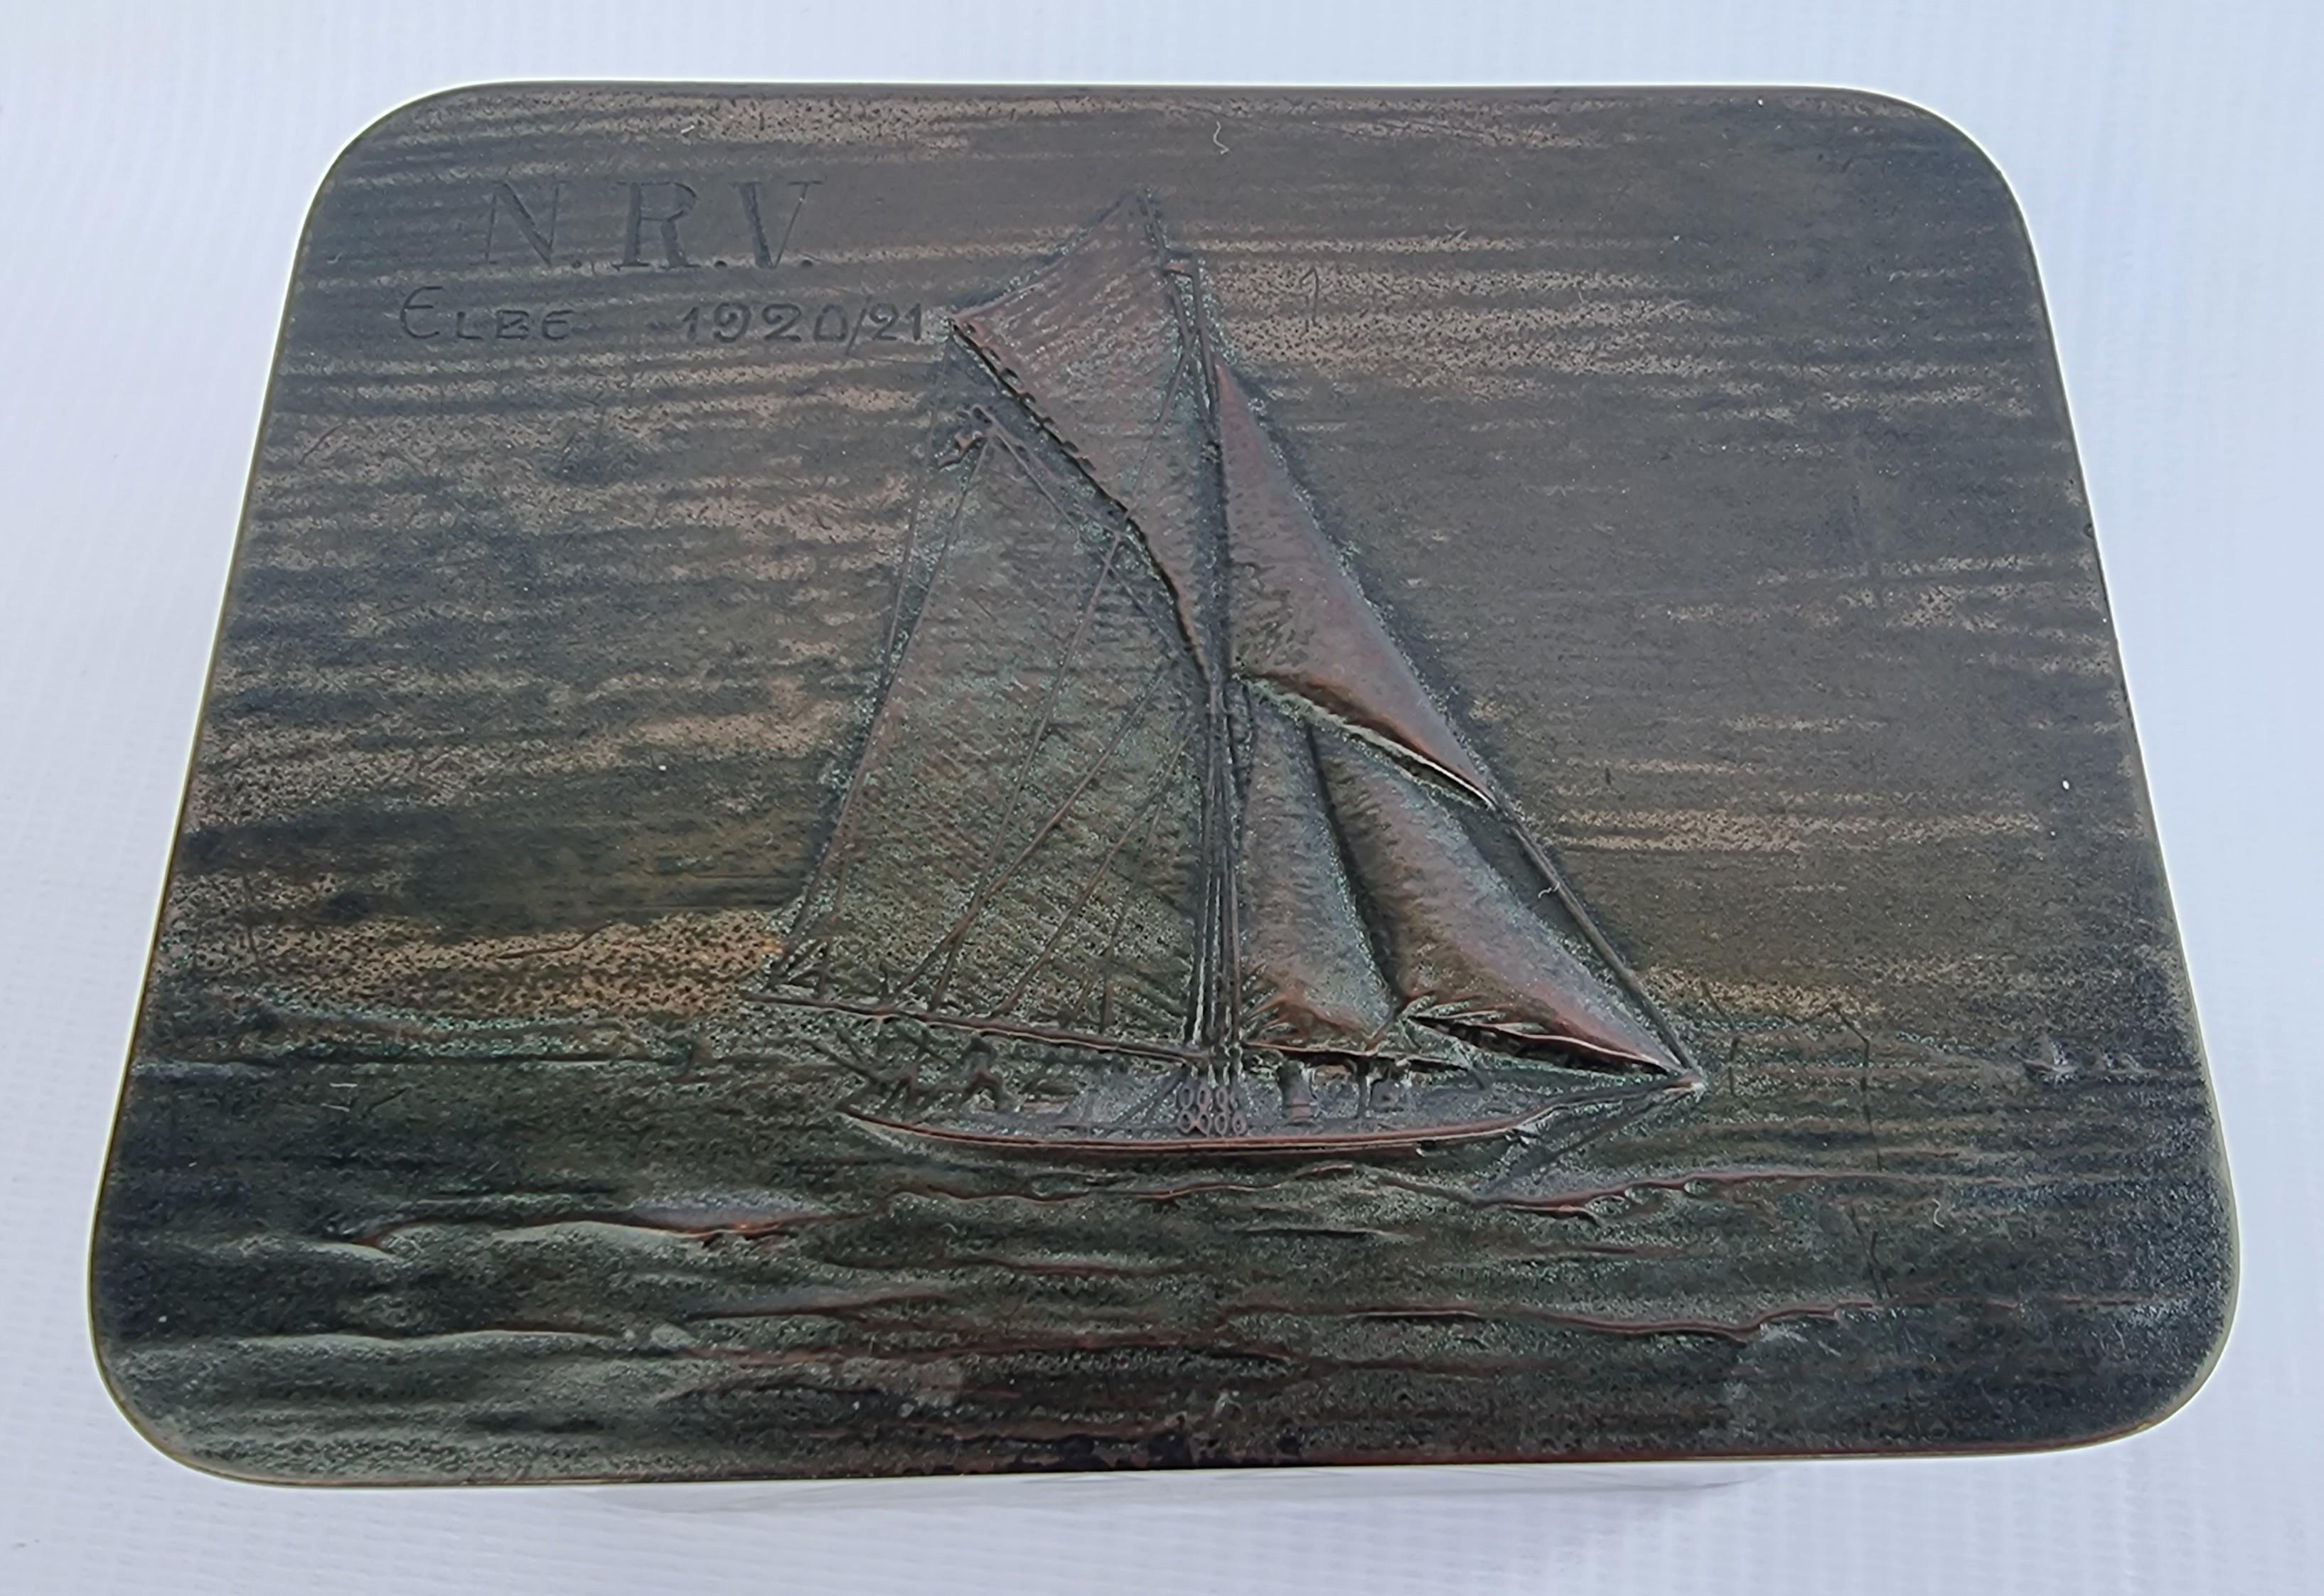 A rare early competitive sailing presentation box which is of nautical interest and made by W.M.F.

This superb W.M.F. presentation cut glass and bronze box is of nautical interest. It is a presentation piece awarded by the prestigious N.R.V. which